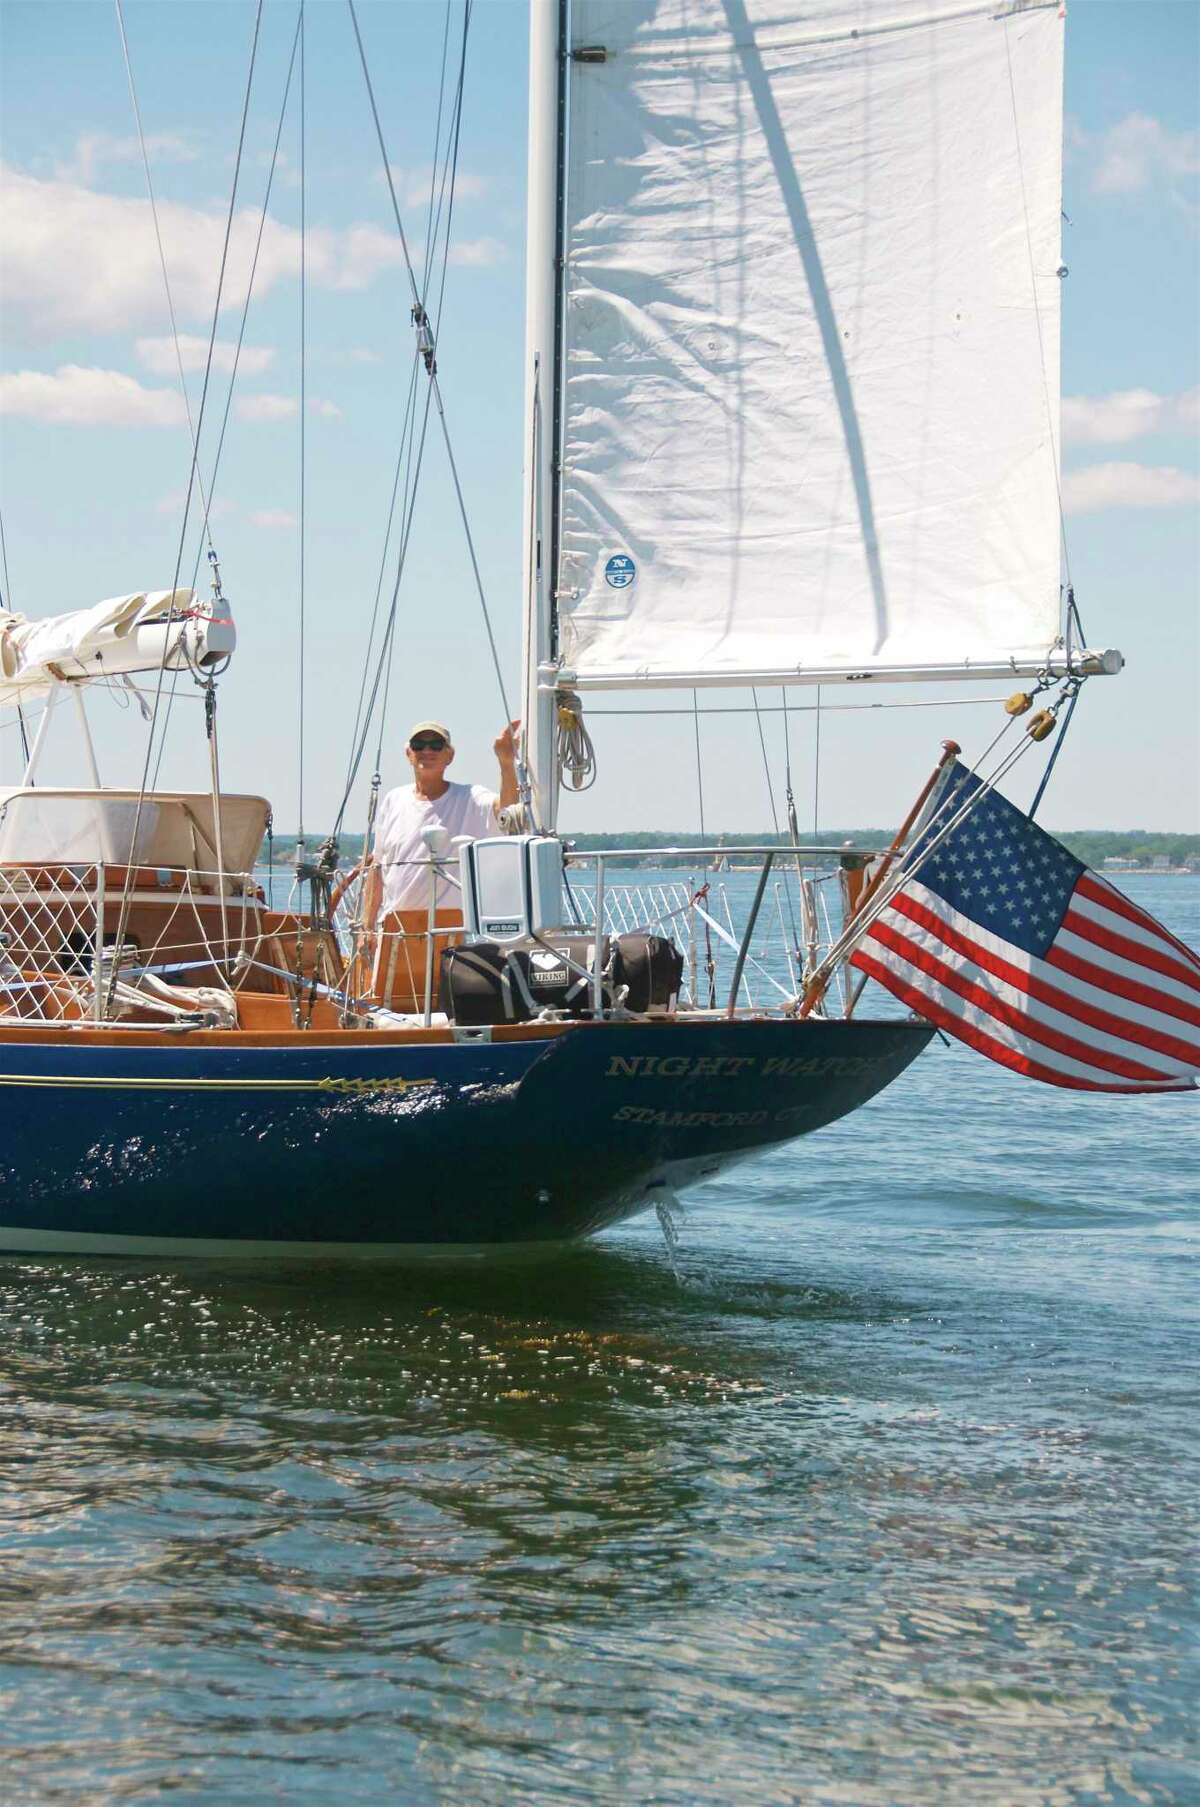 Stamford resident David Tunick arrives in Stamford Harbor and is welcomed home by members of the Stamford Yacht Club on Wednesday, Aug. 3, 2022 after a solo trip across the Atlantic Ocean. He departed from A Coruña, Spain, on June 11, 2022.